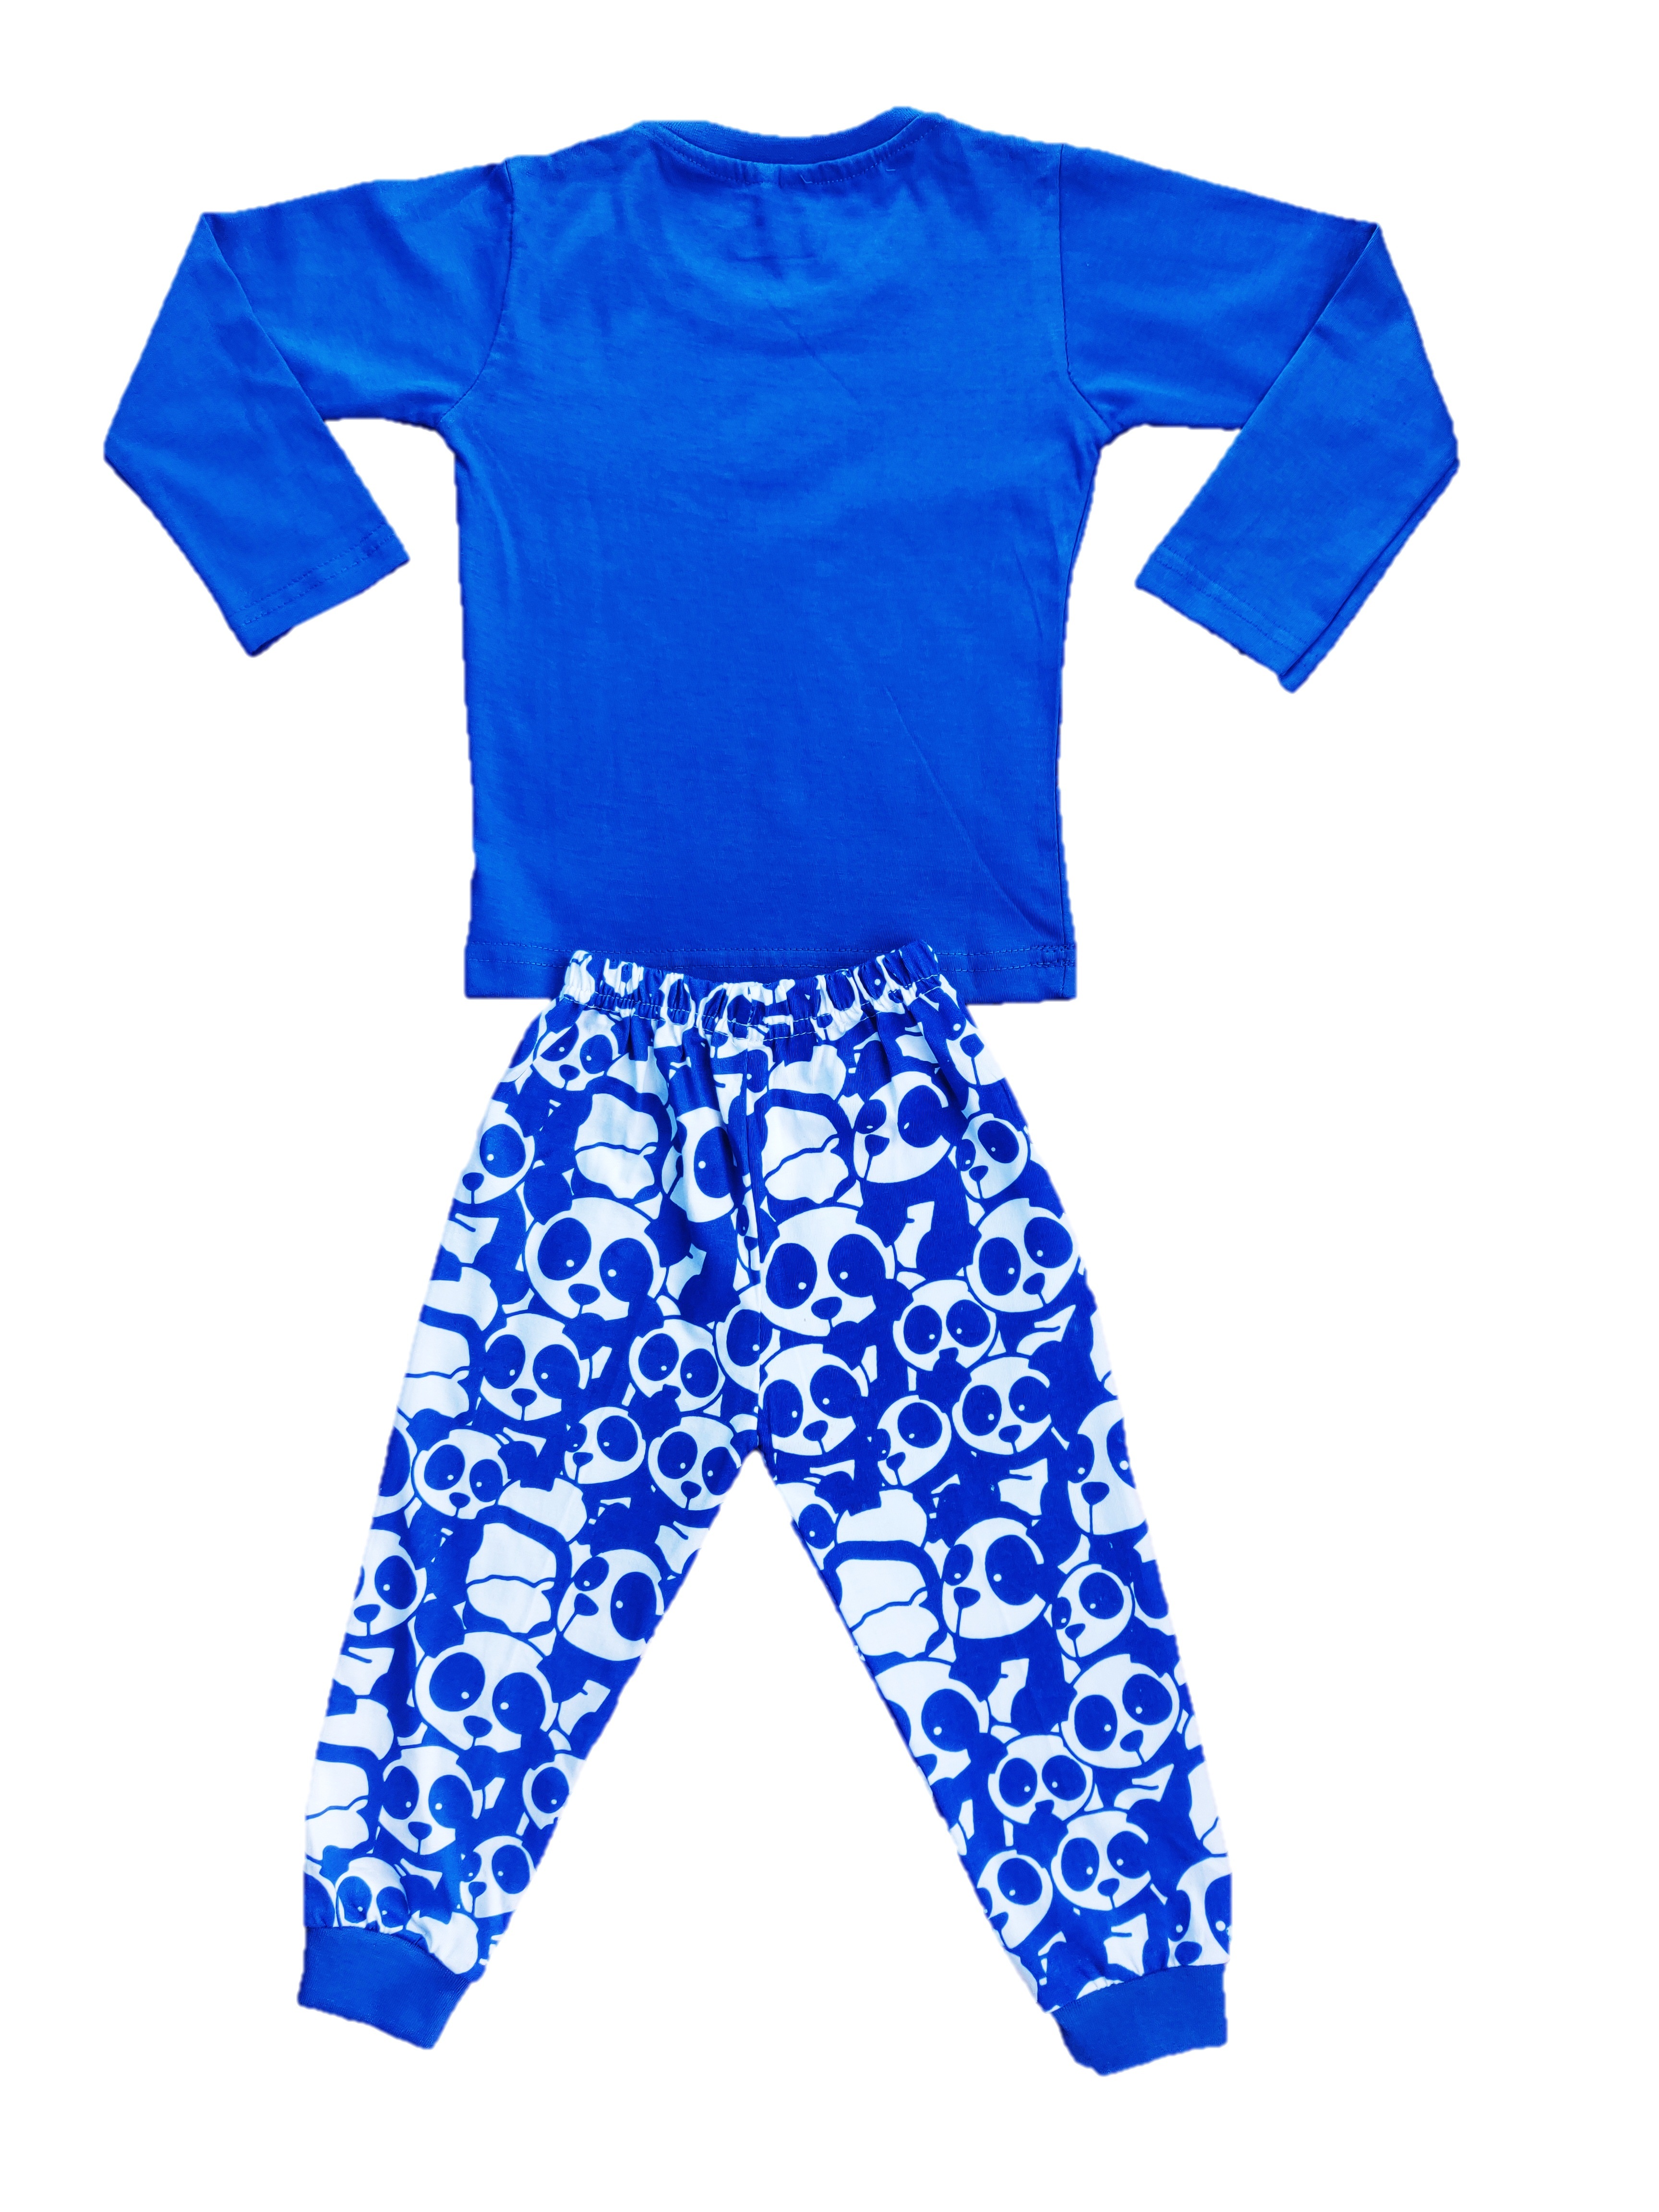 Kids Little Heart Printed Cotton Top And Pant